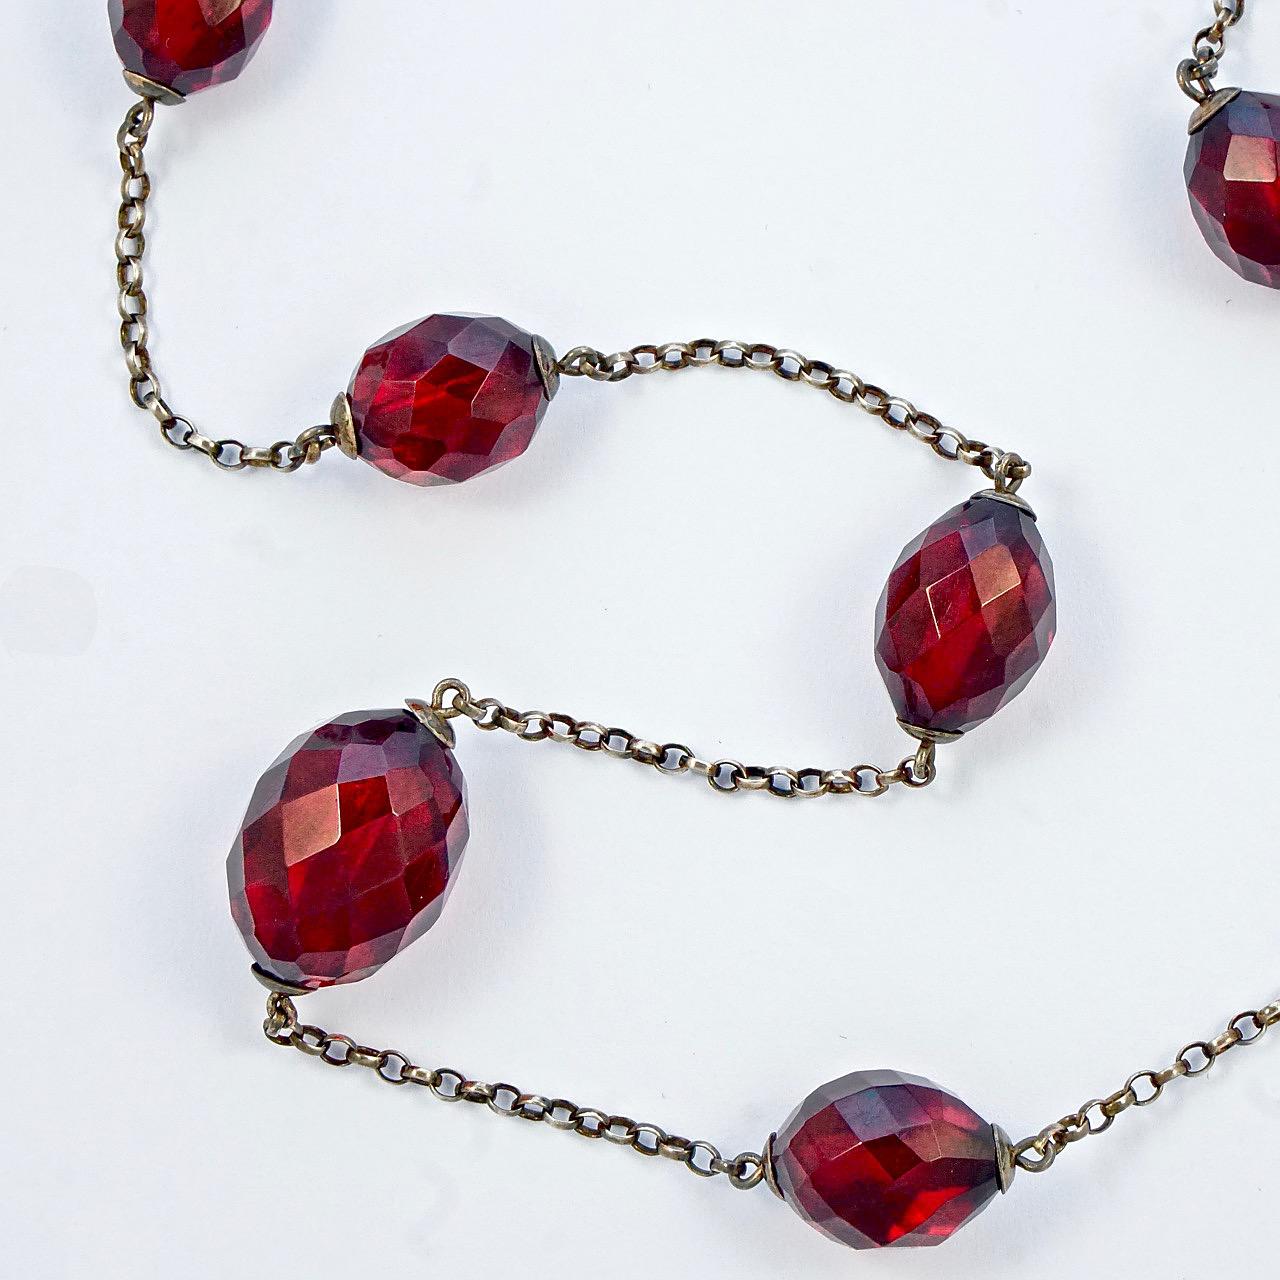 Lovely Art Deco cherry red Bakelite graduated and faceted beads, on sterling silver chain. Measuring length 71.5 cm / 28.1 inches, and the largest bead is 1.9cm / .75 inch by 1.5cm / .6 inch. The necklace is in very good condition.

This is a